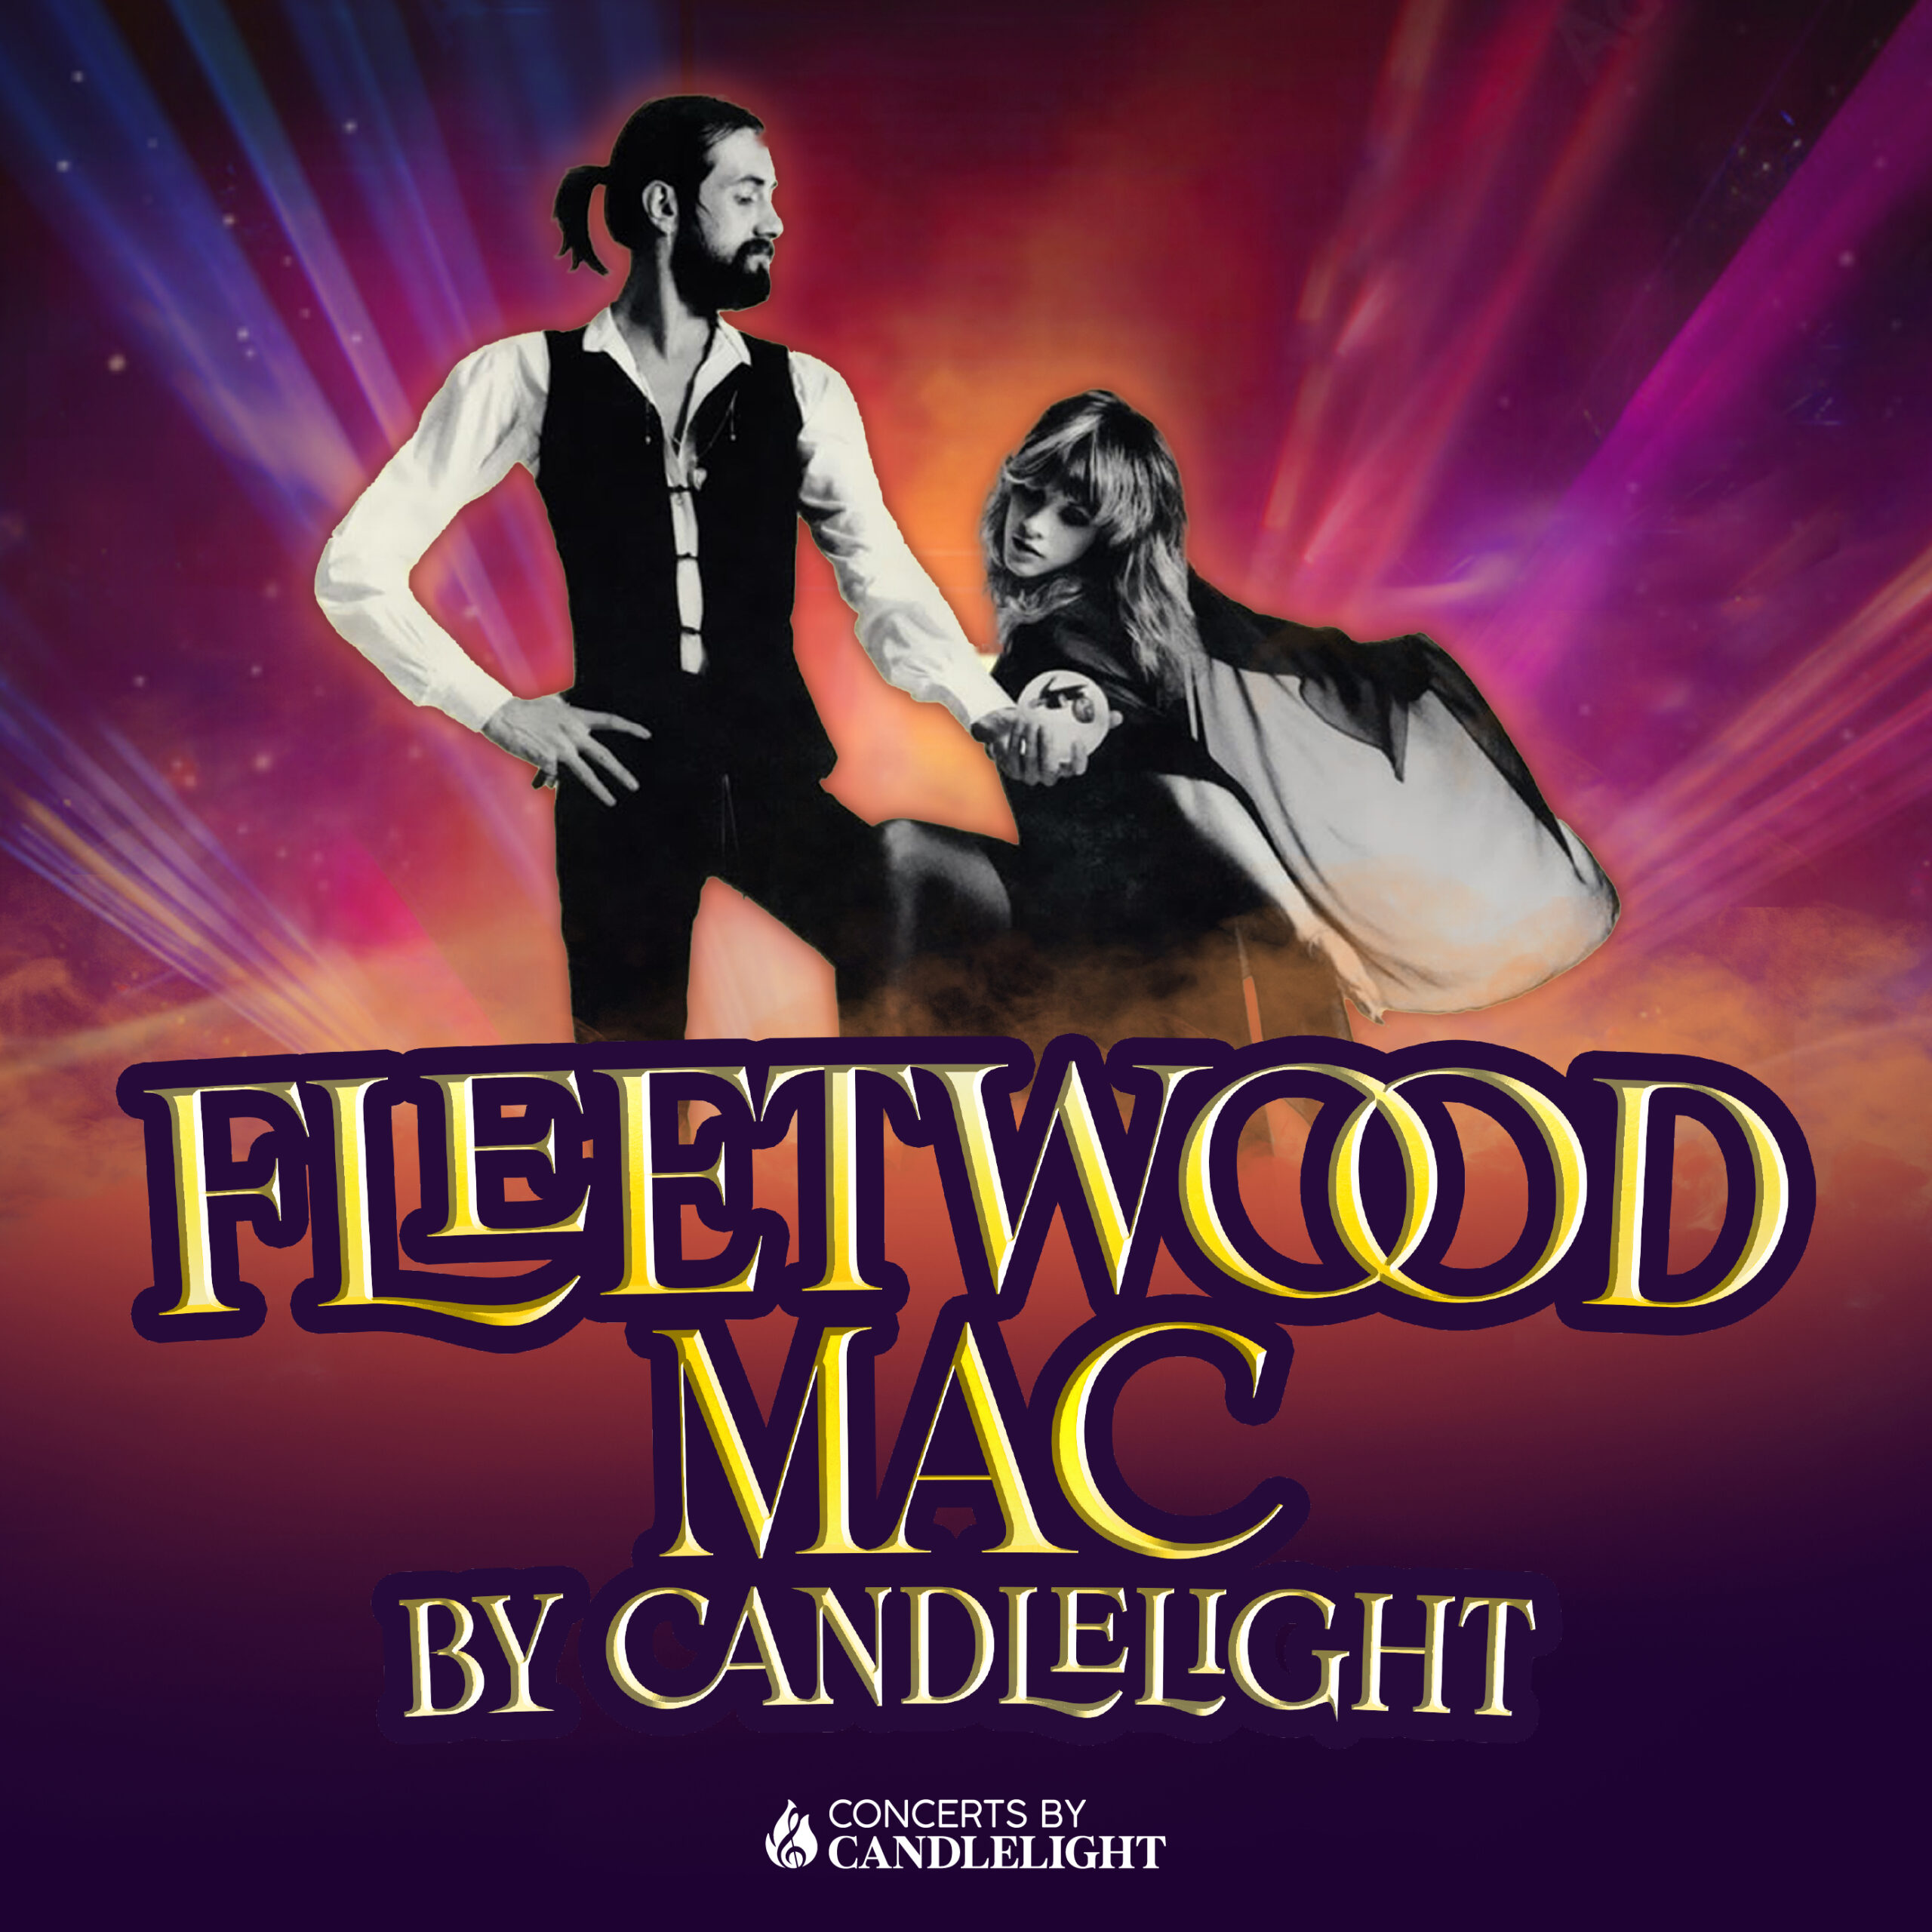 Fleetwood Mac by Candlelight